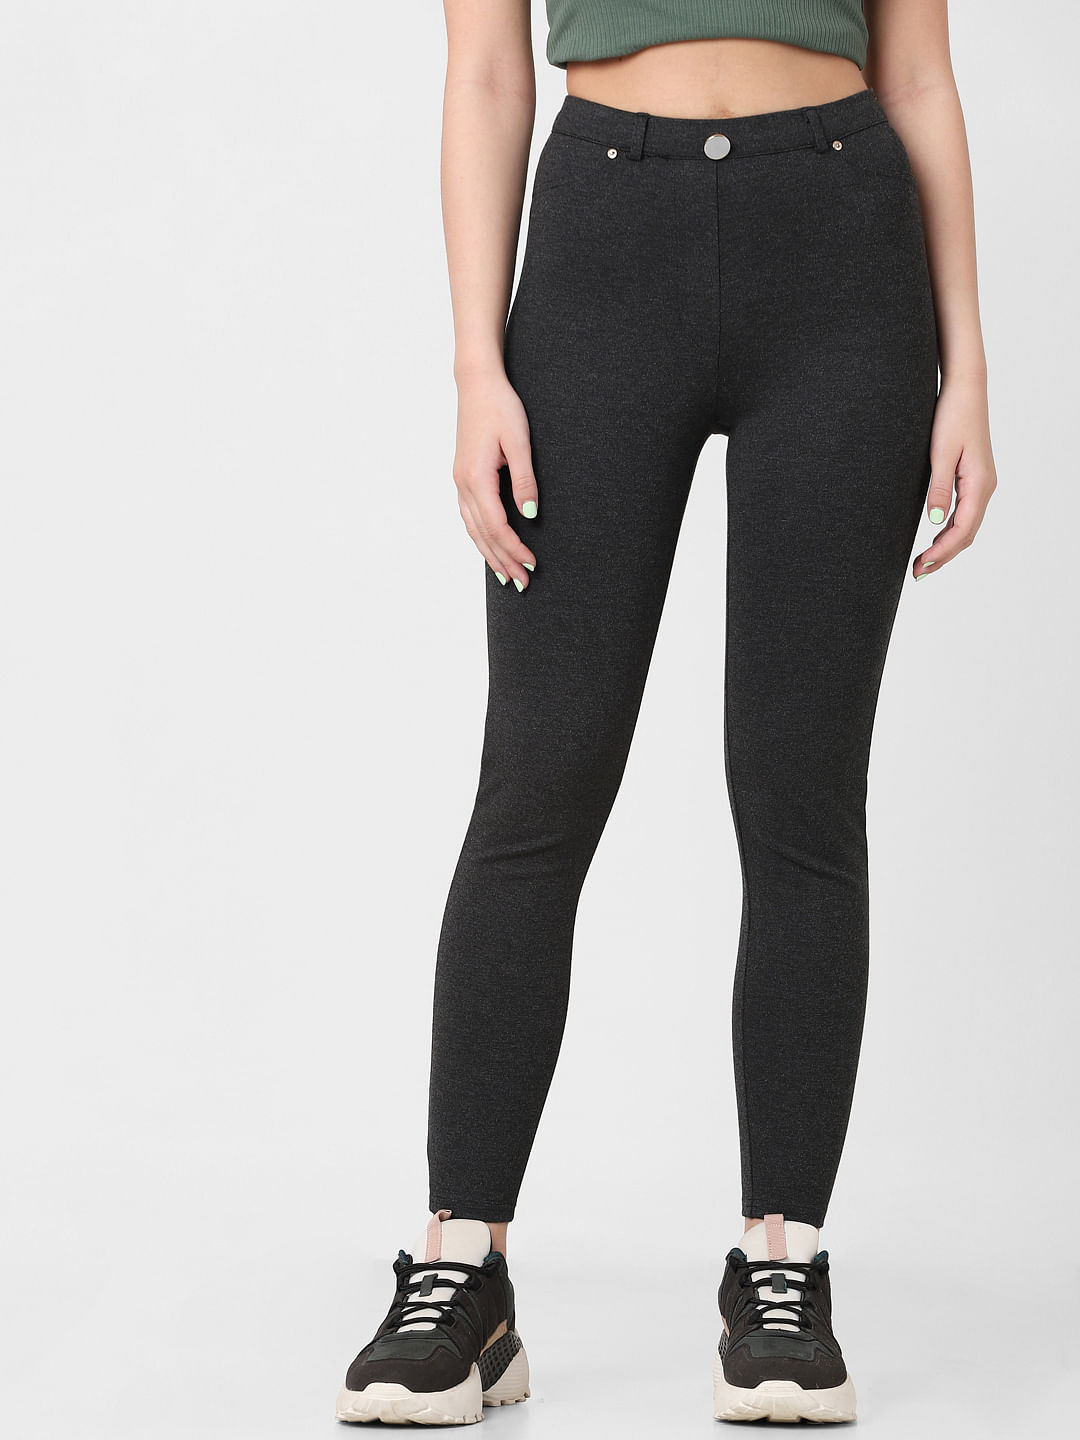 Check styling ideas for「HEATTECH Extra Stretch Leggings Trousers、Dress  Skinny Belt」| UNIQLO IN